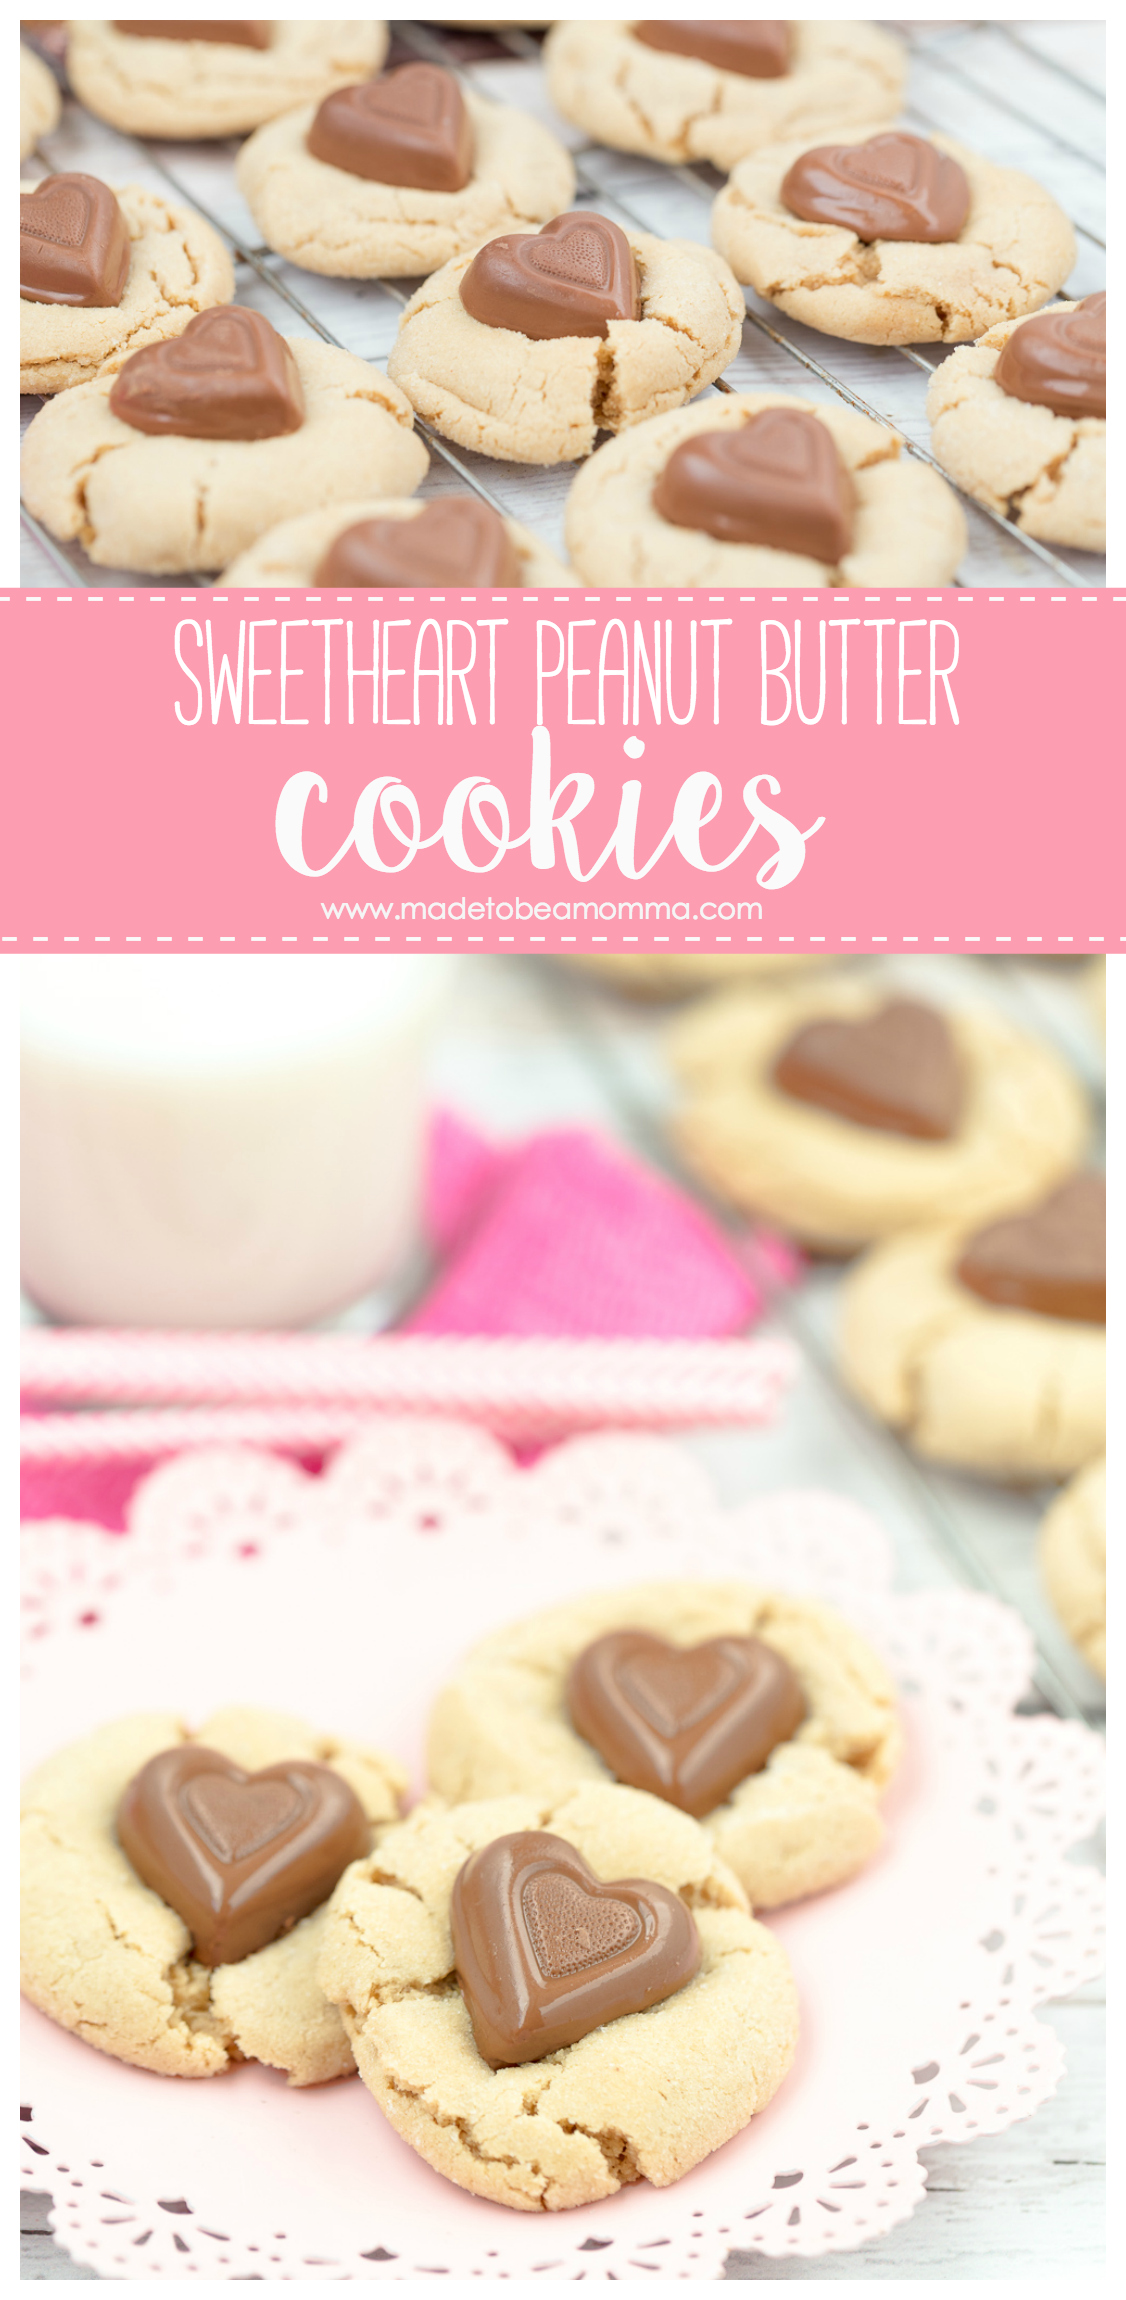 Sweetheart Peanut Butter Cookies | Cookies | Valentines Day | Baking